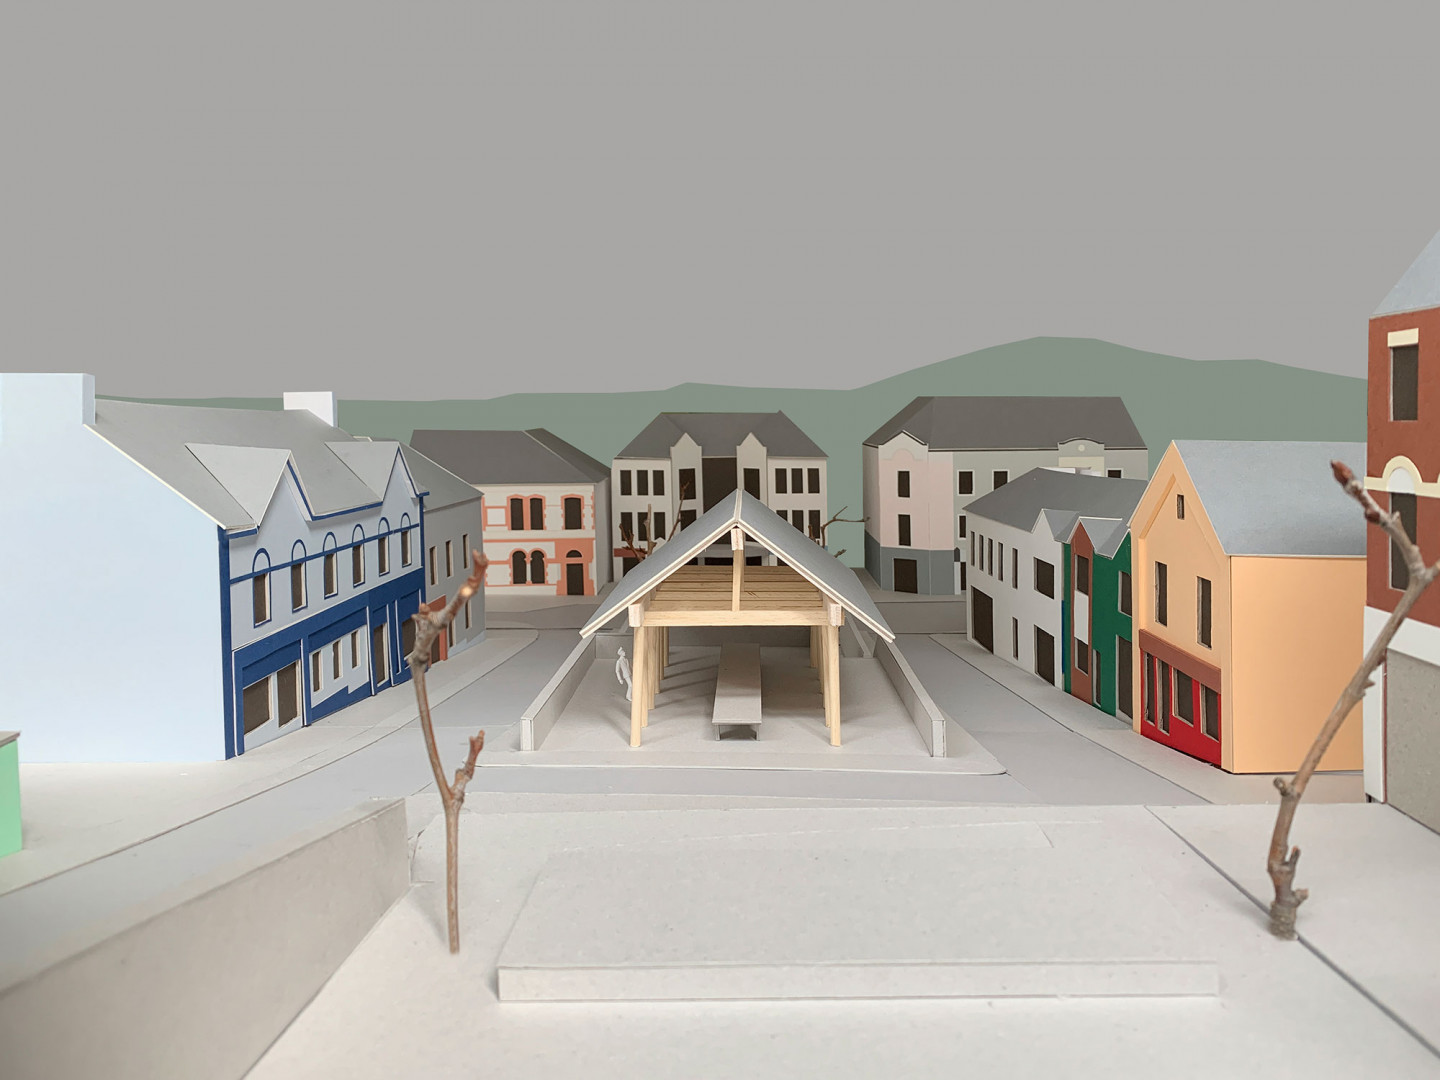 Proposal for an intervention in Market Square in Letterkenny by Howland Evans Architects, made from foamboard, greycard, coloured paper, balsa wood, glue and double-sided tape.